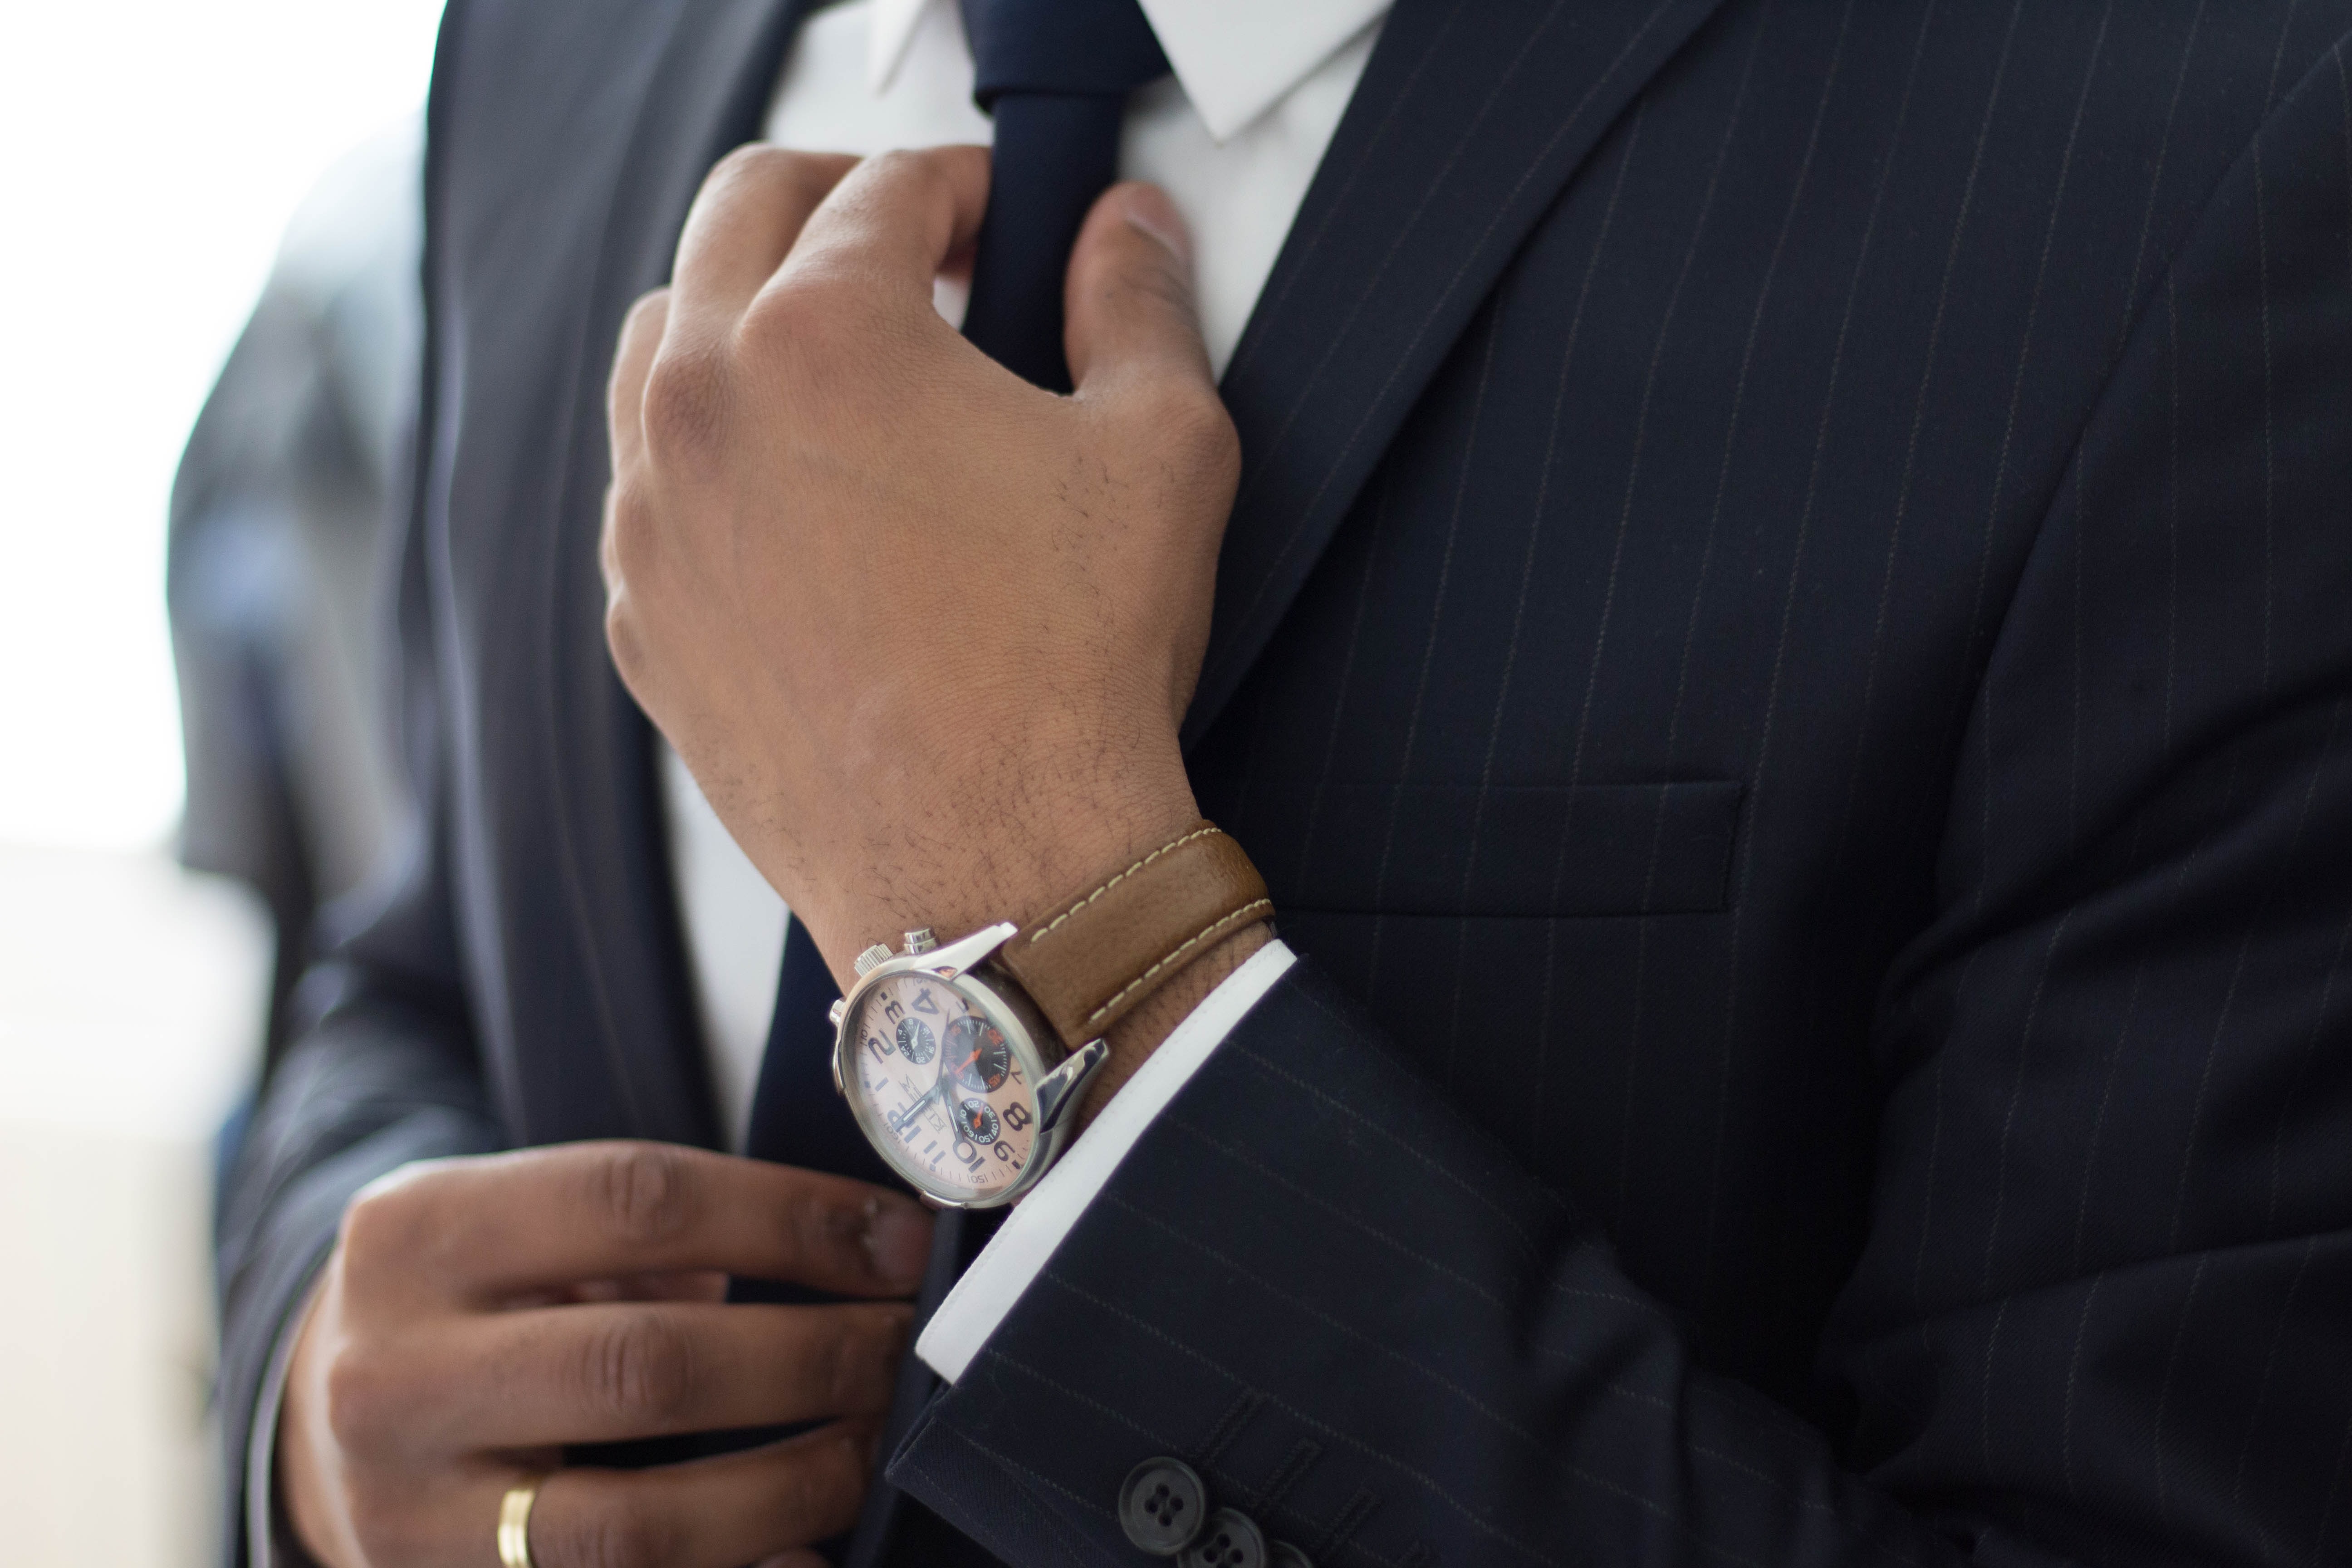 Man with suit and watch